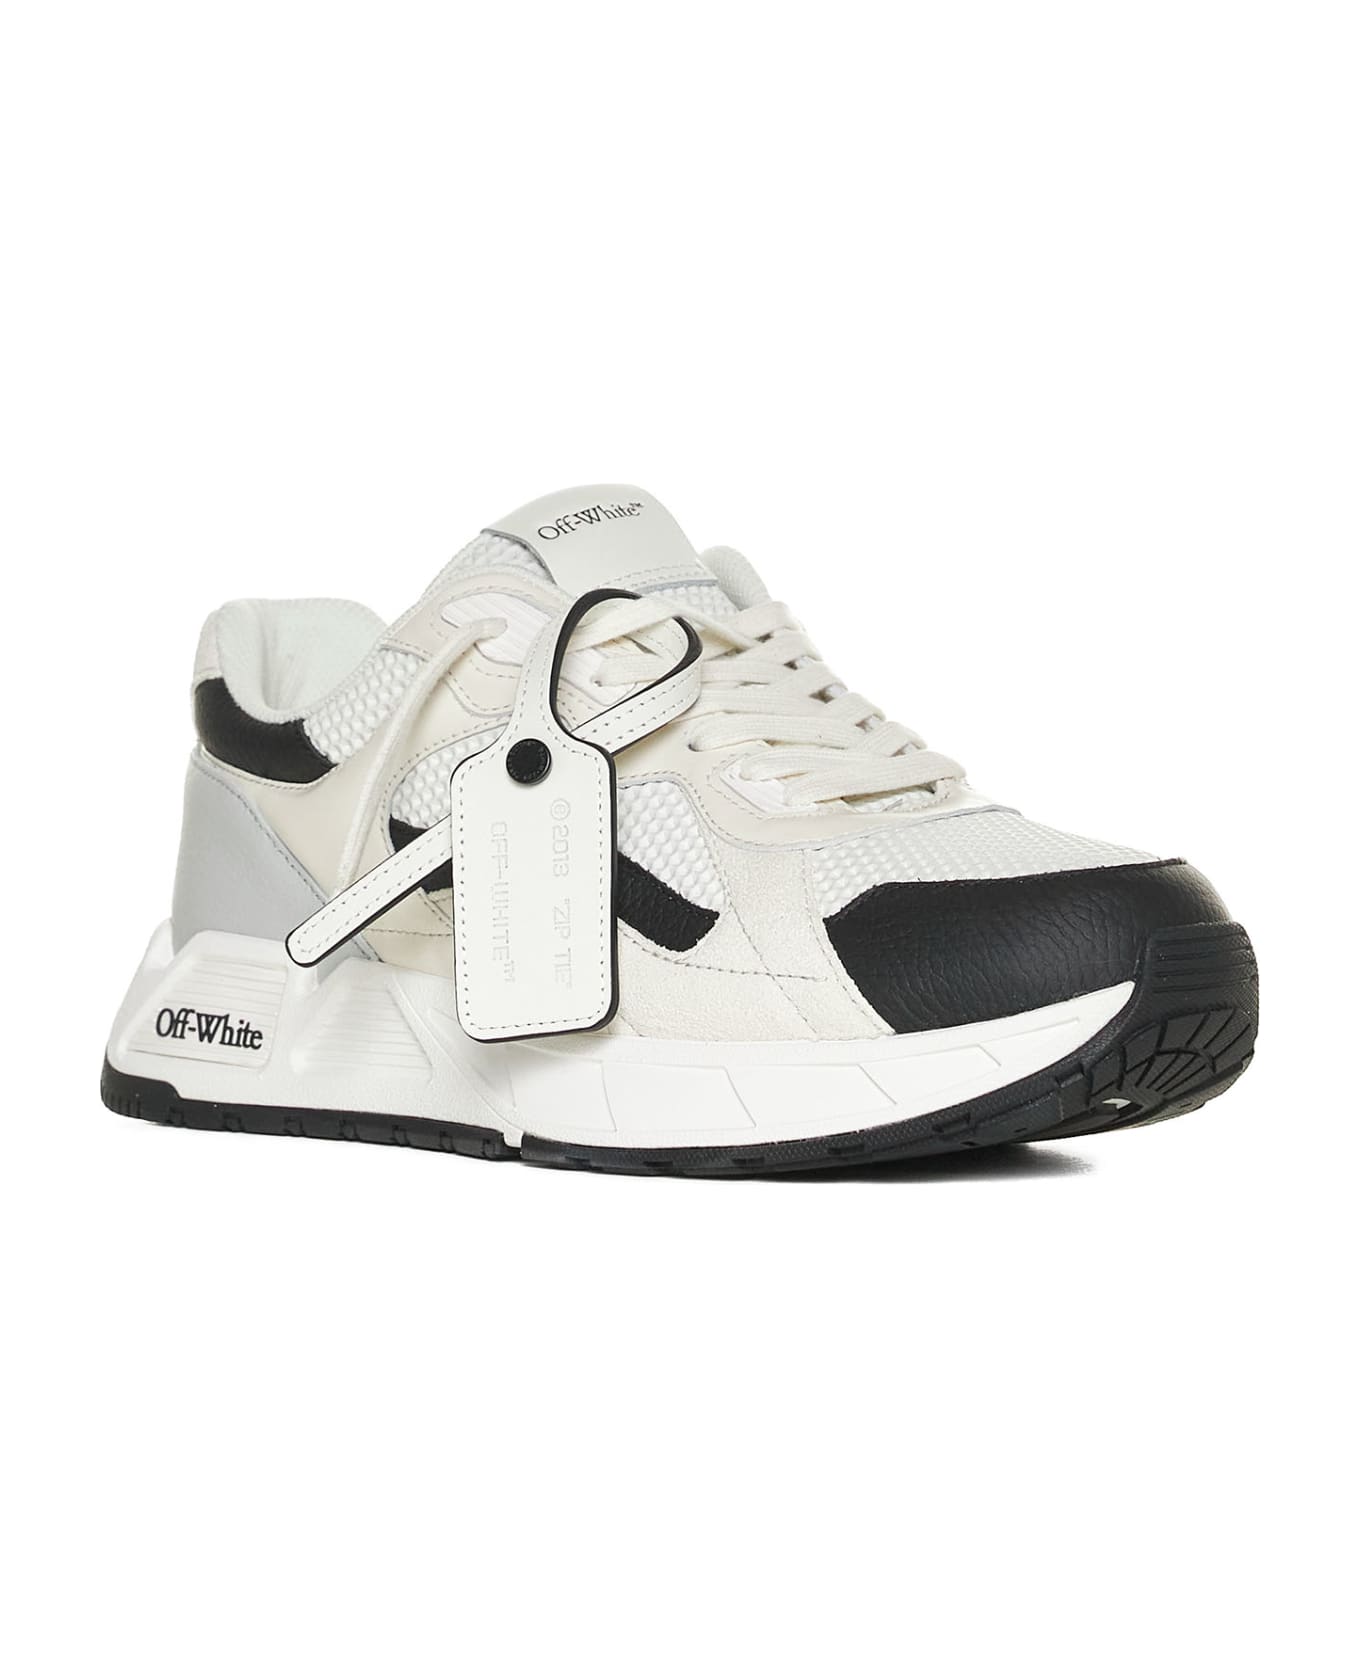 Off-White Kick Off Lace-up Sneakers - White BLACK